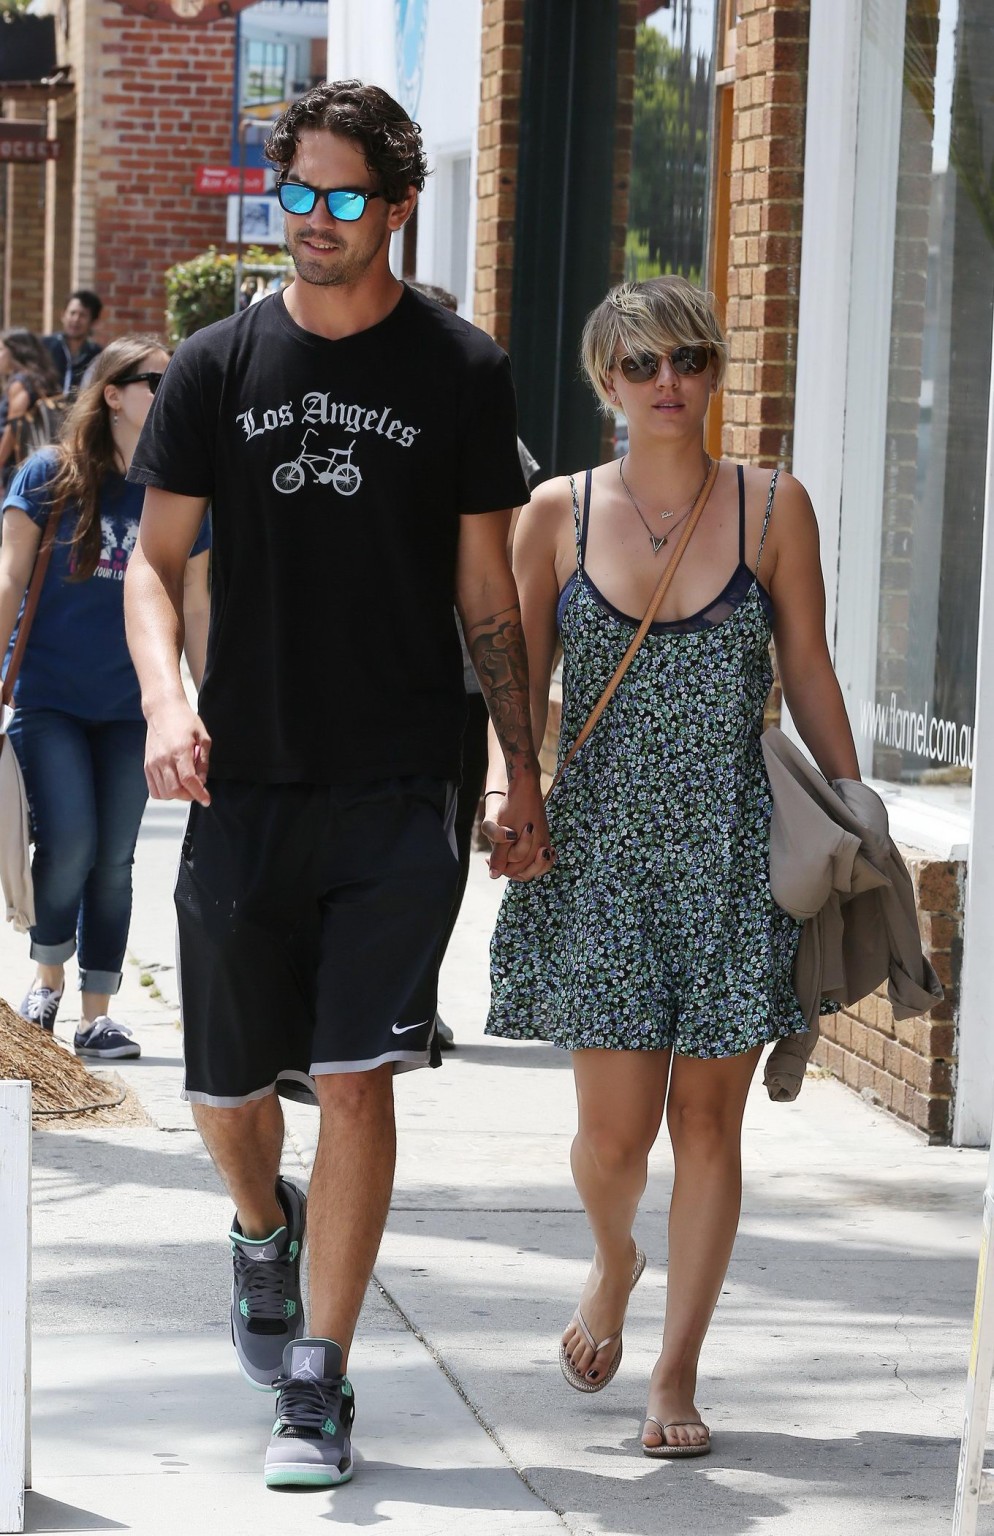 Kaley Cuoco boasting in her full bra all over Los Angeles #75193230